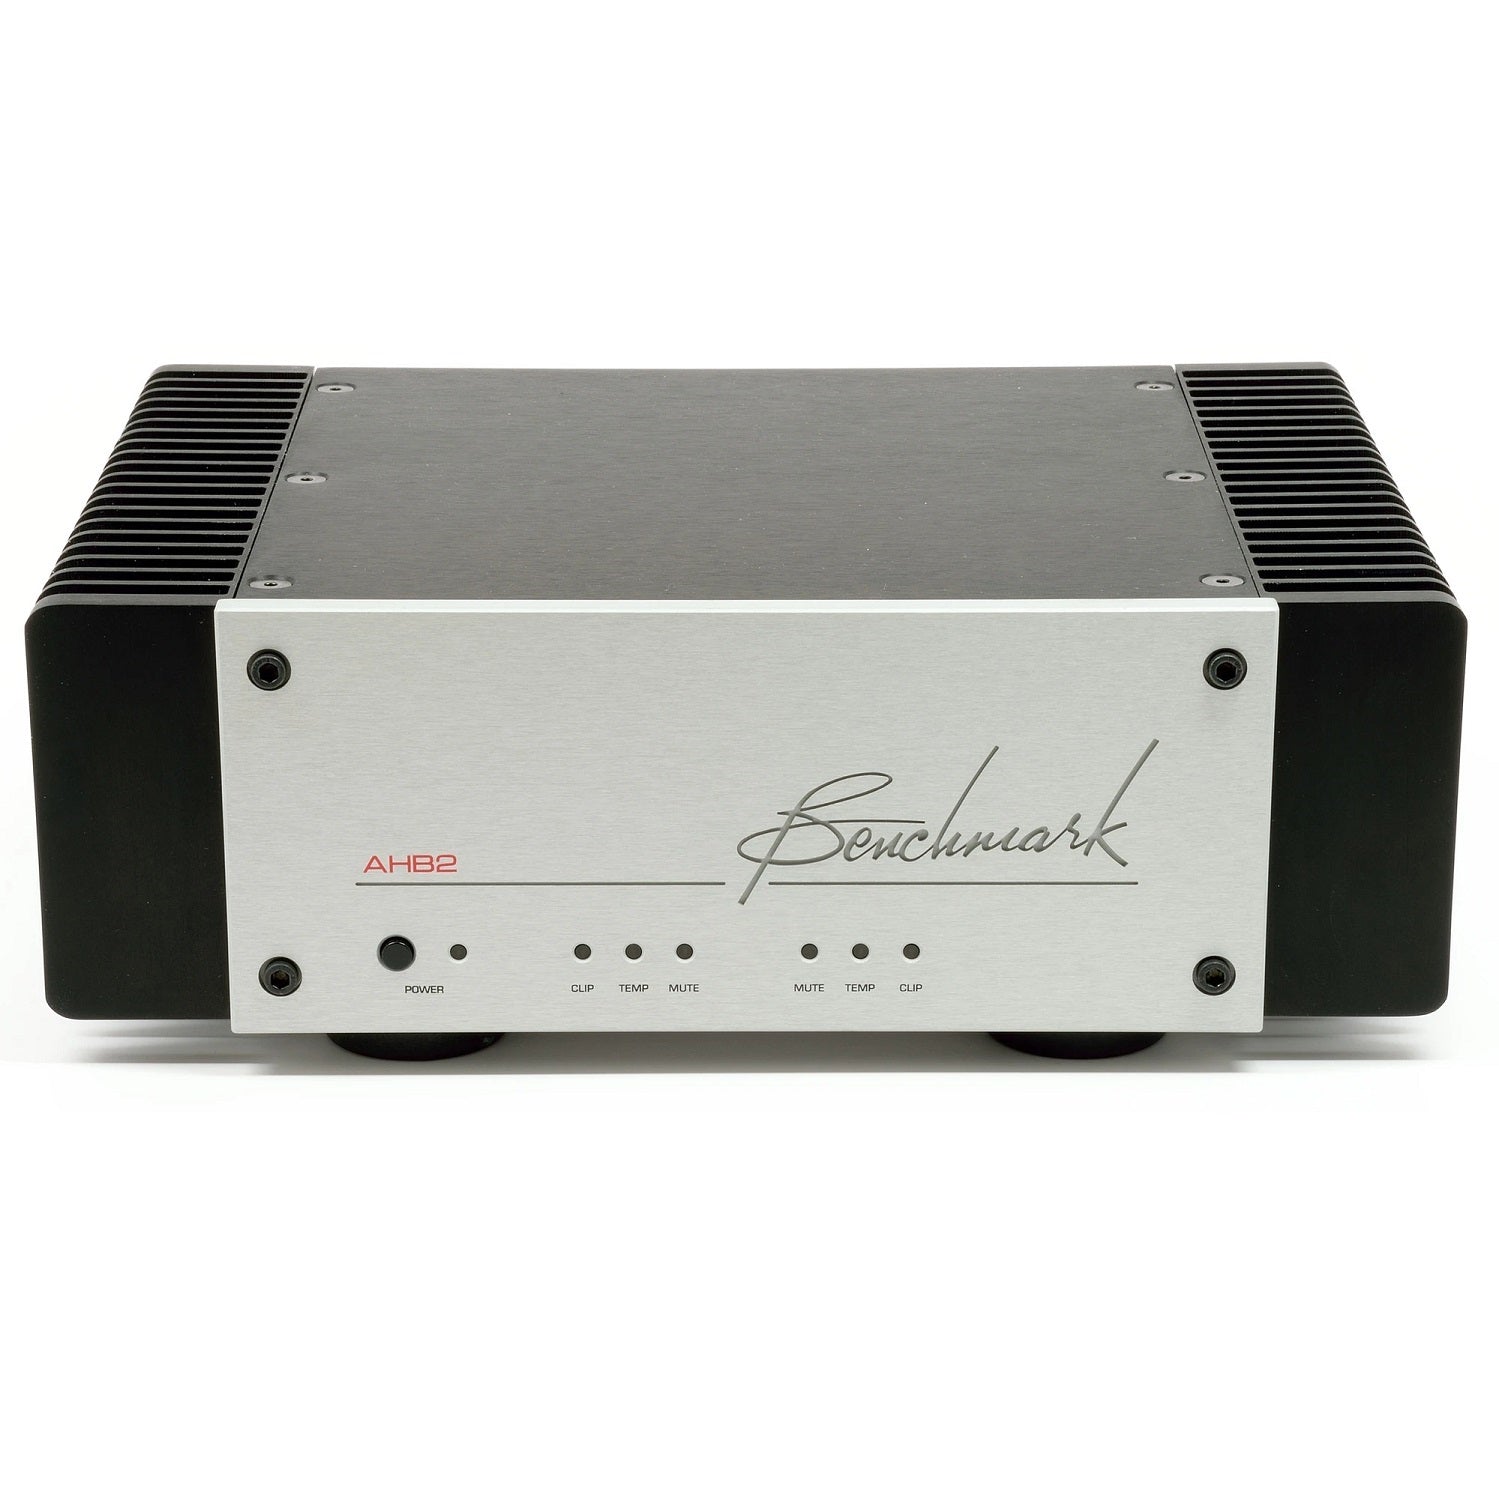 Benchmark AHB2 Power Amplifier front view